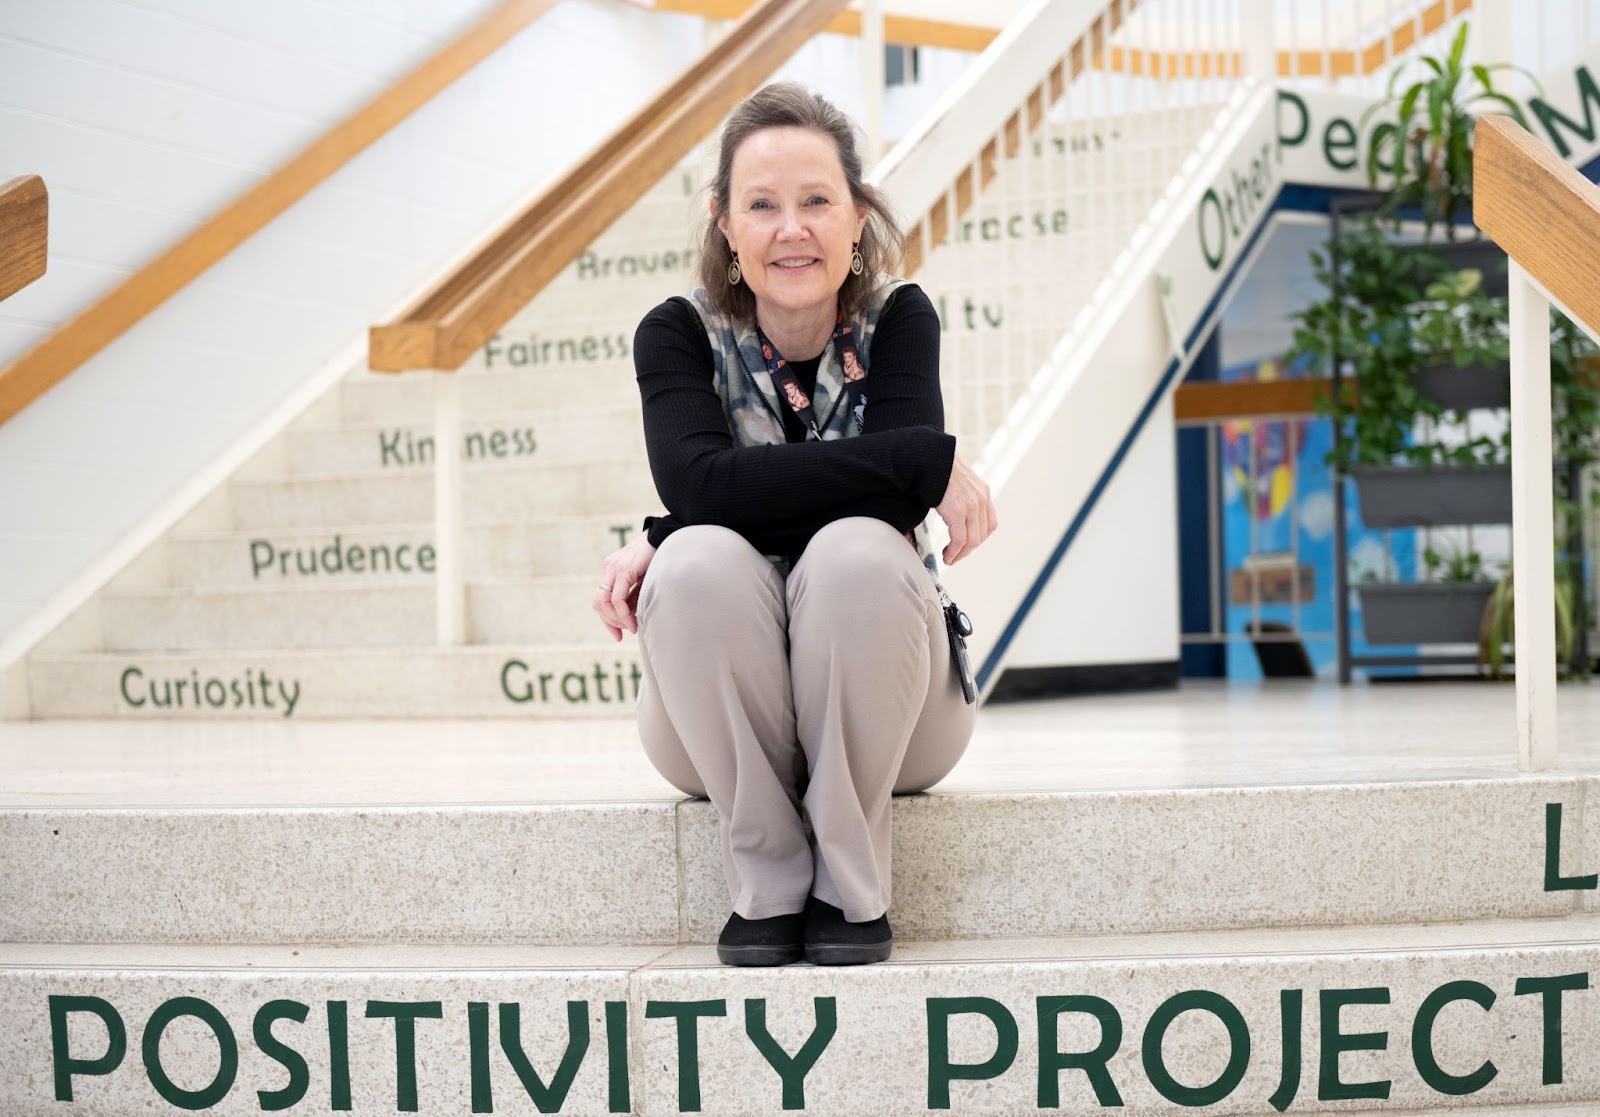 A counselor sits on steps, upon which are written "Positivity Project"